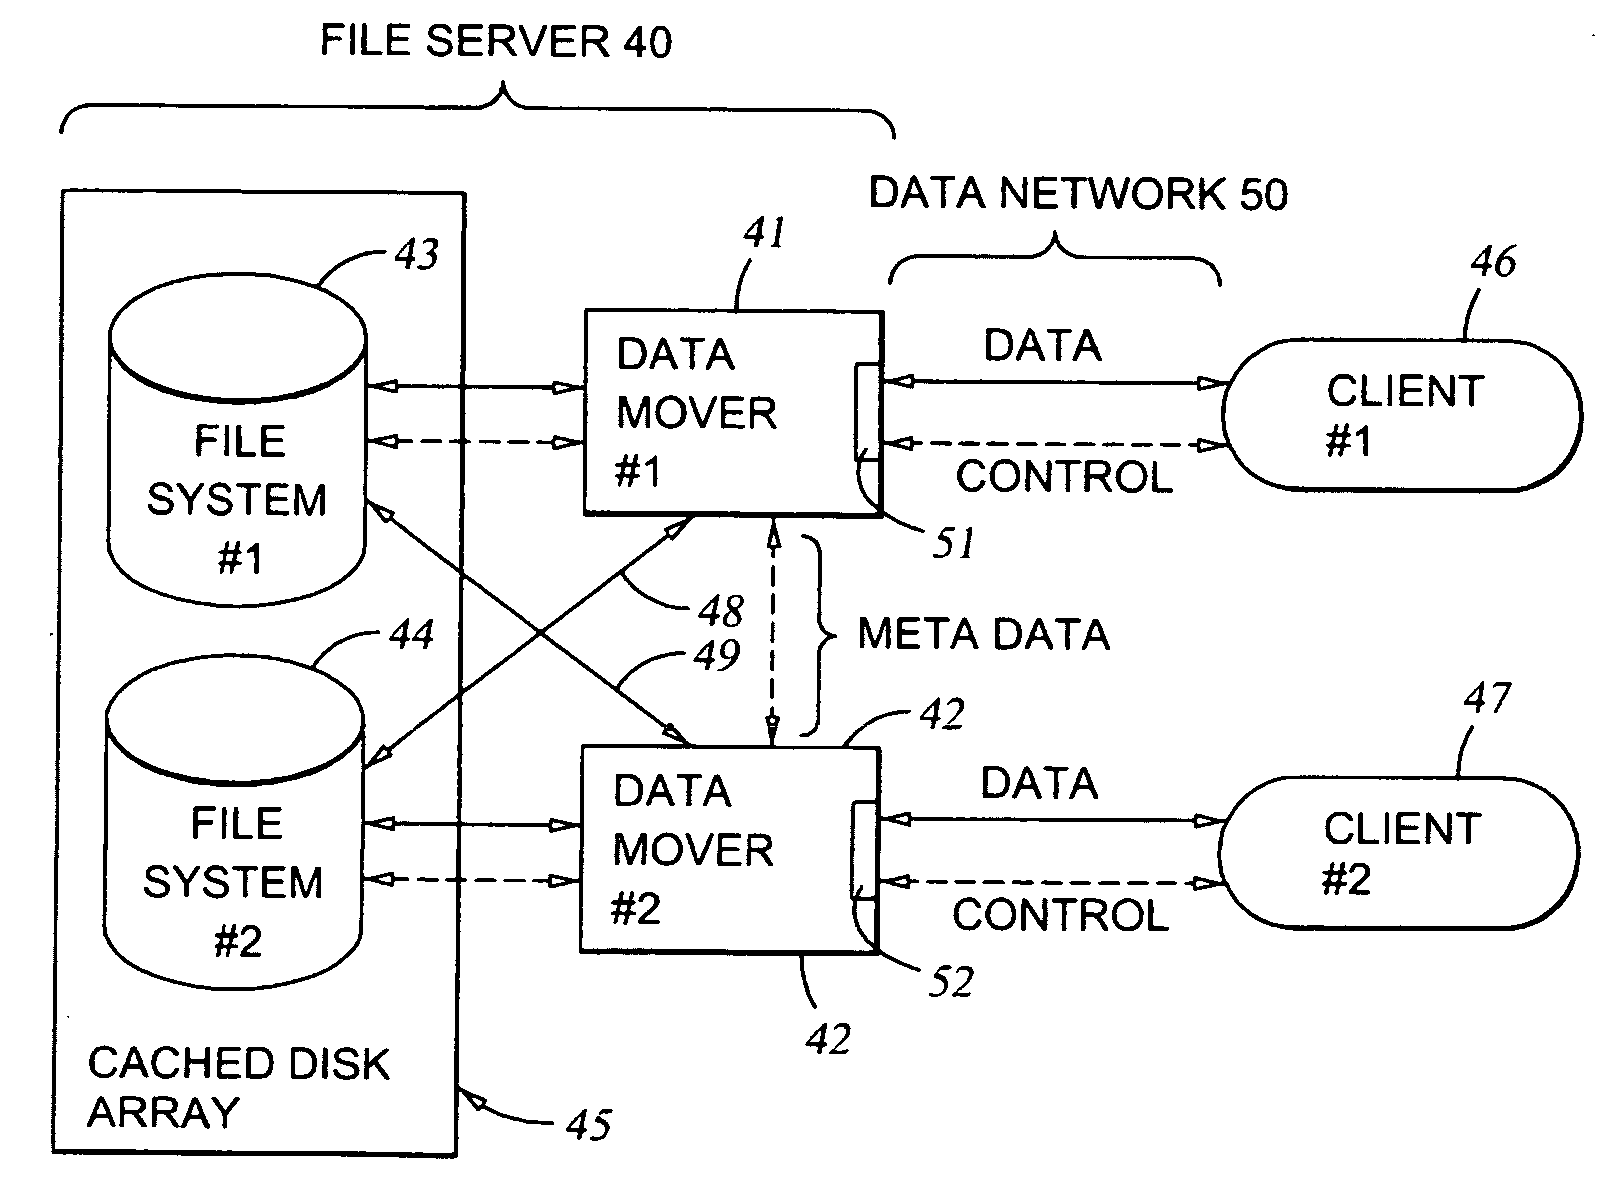 File server system providing direct data sharing between clients with a server acting as an arbiter and coordinator